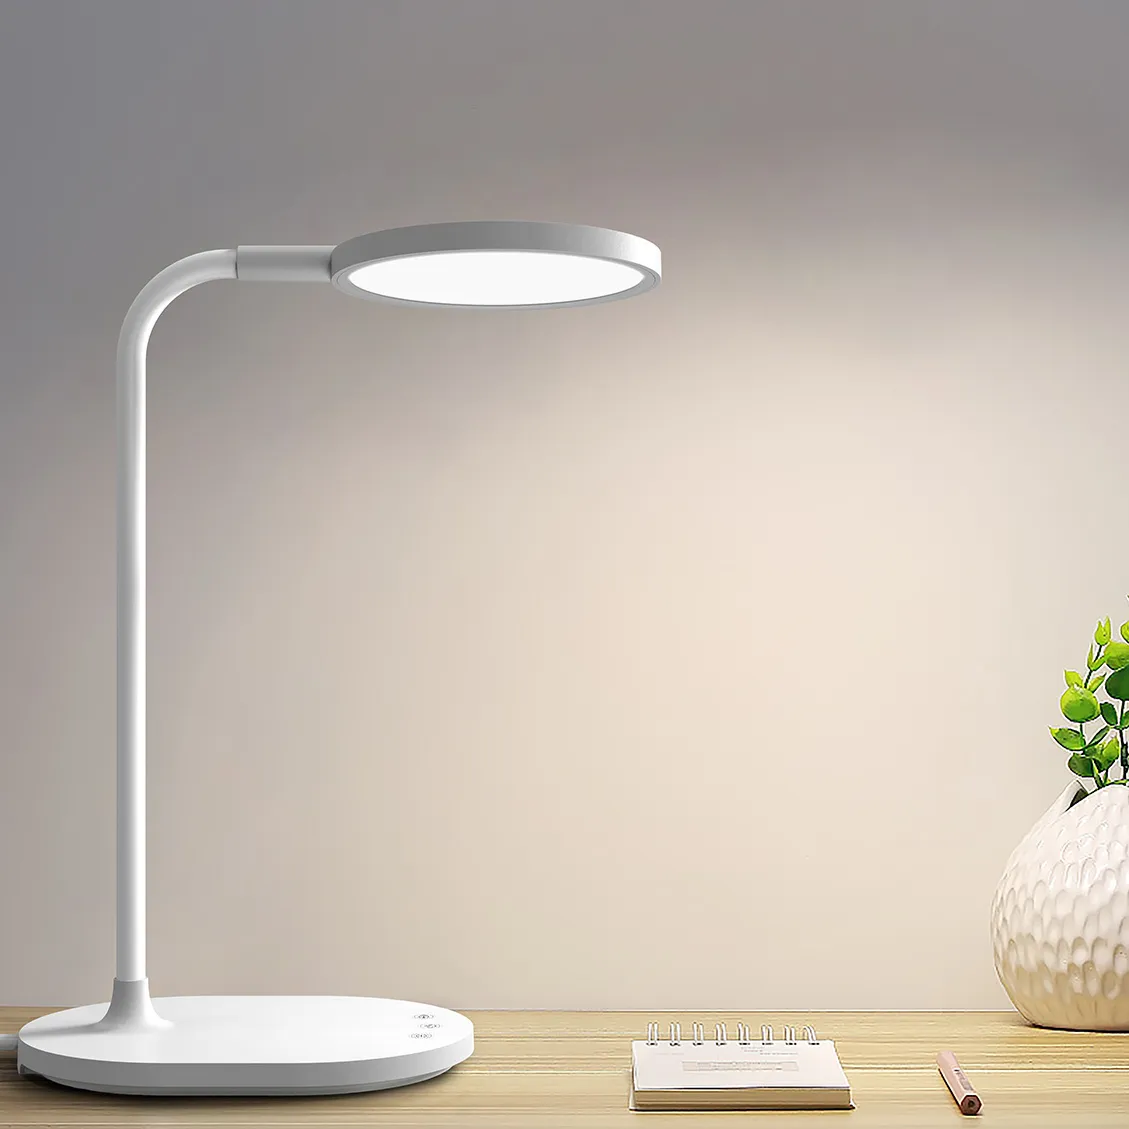 Inveer "TUV RG0" Level Anti Blue Light LED Desk Lamp With Touch Control 9W Bright Reading Table Lamp 3 Color Modes